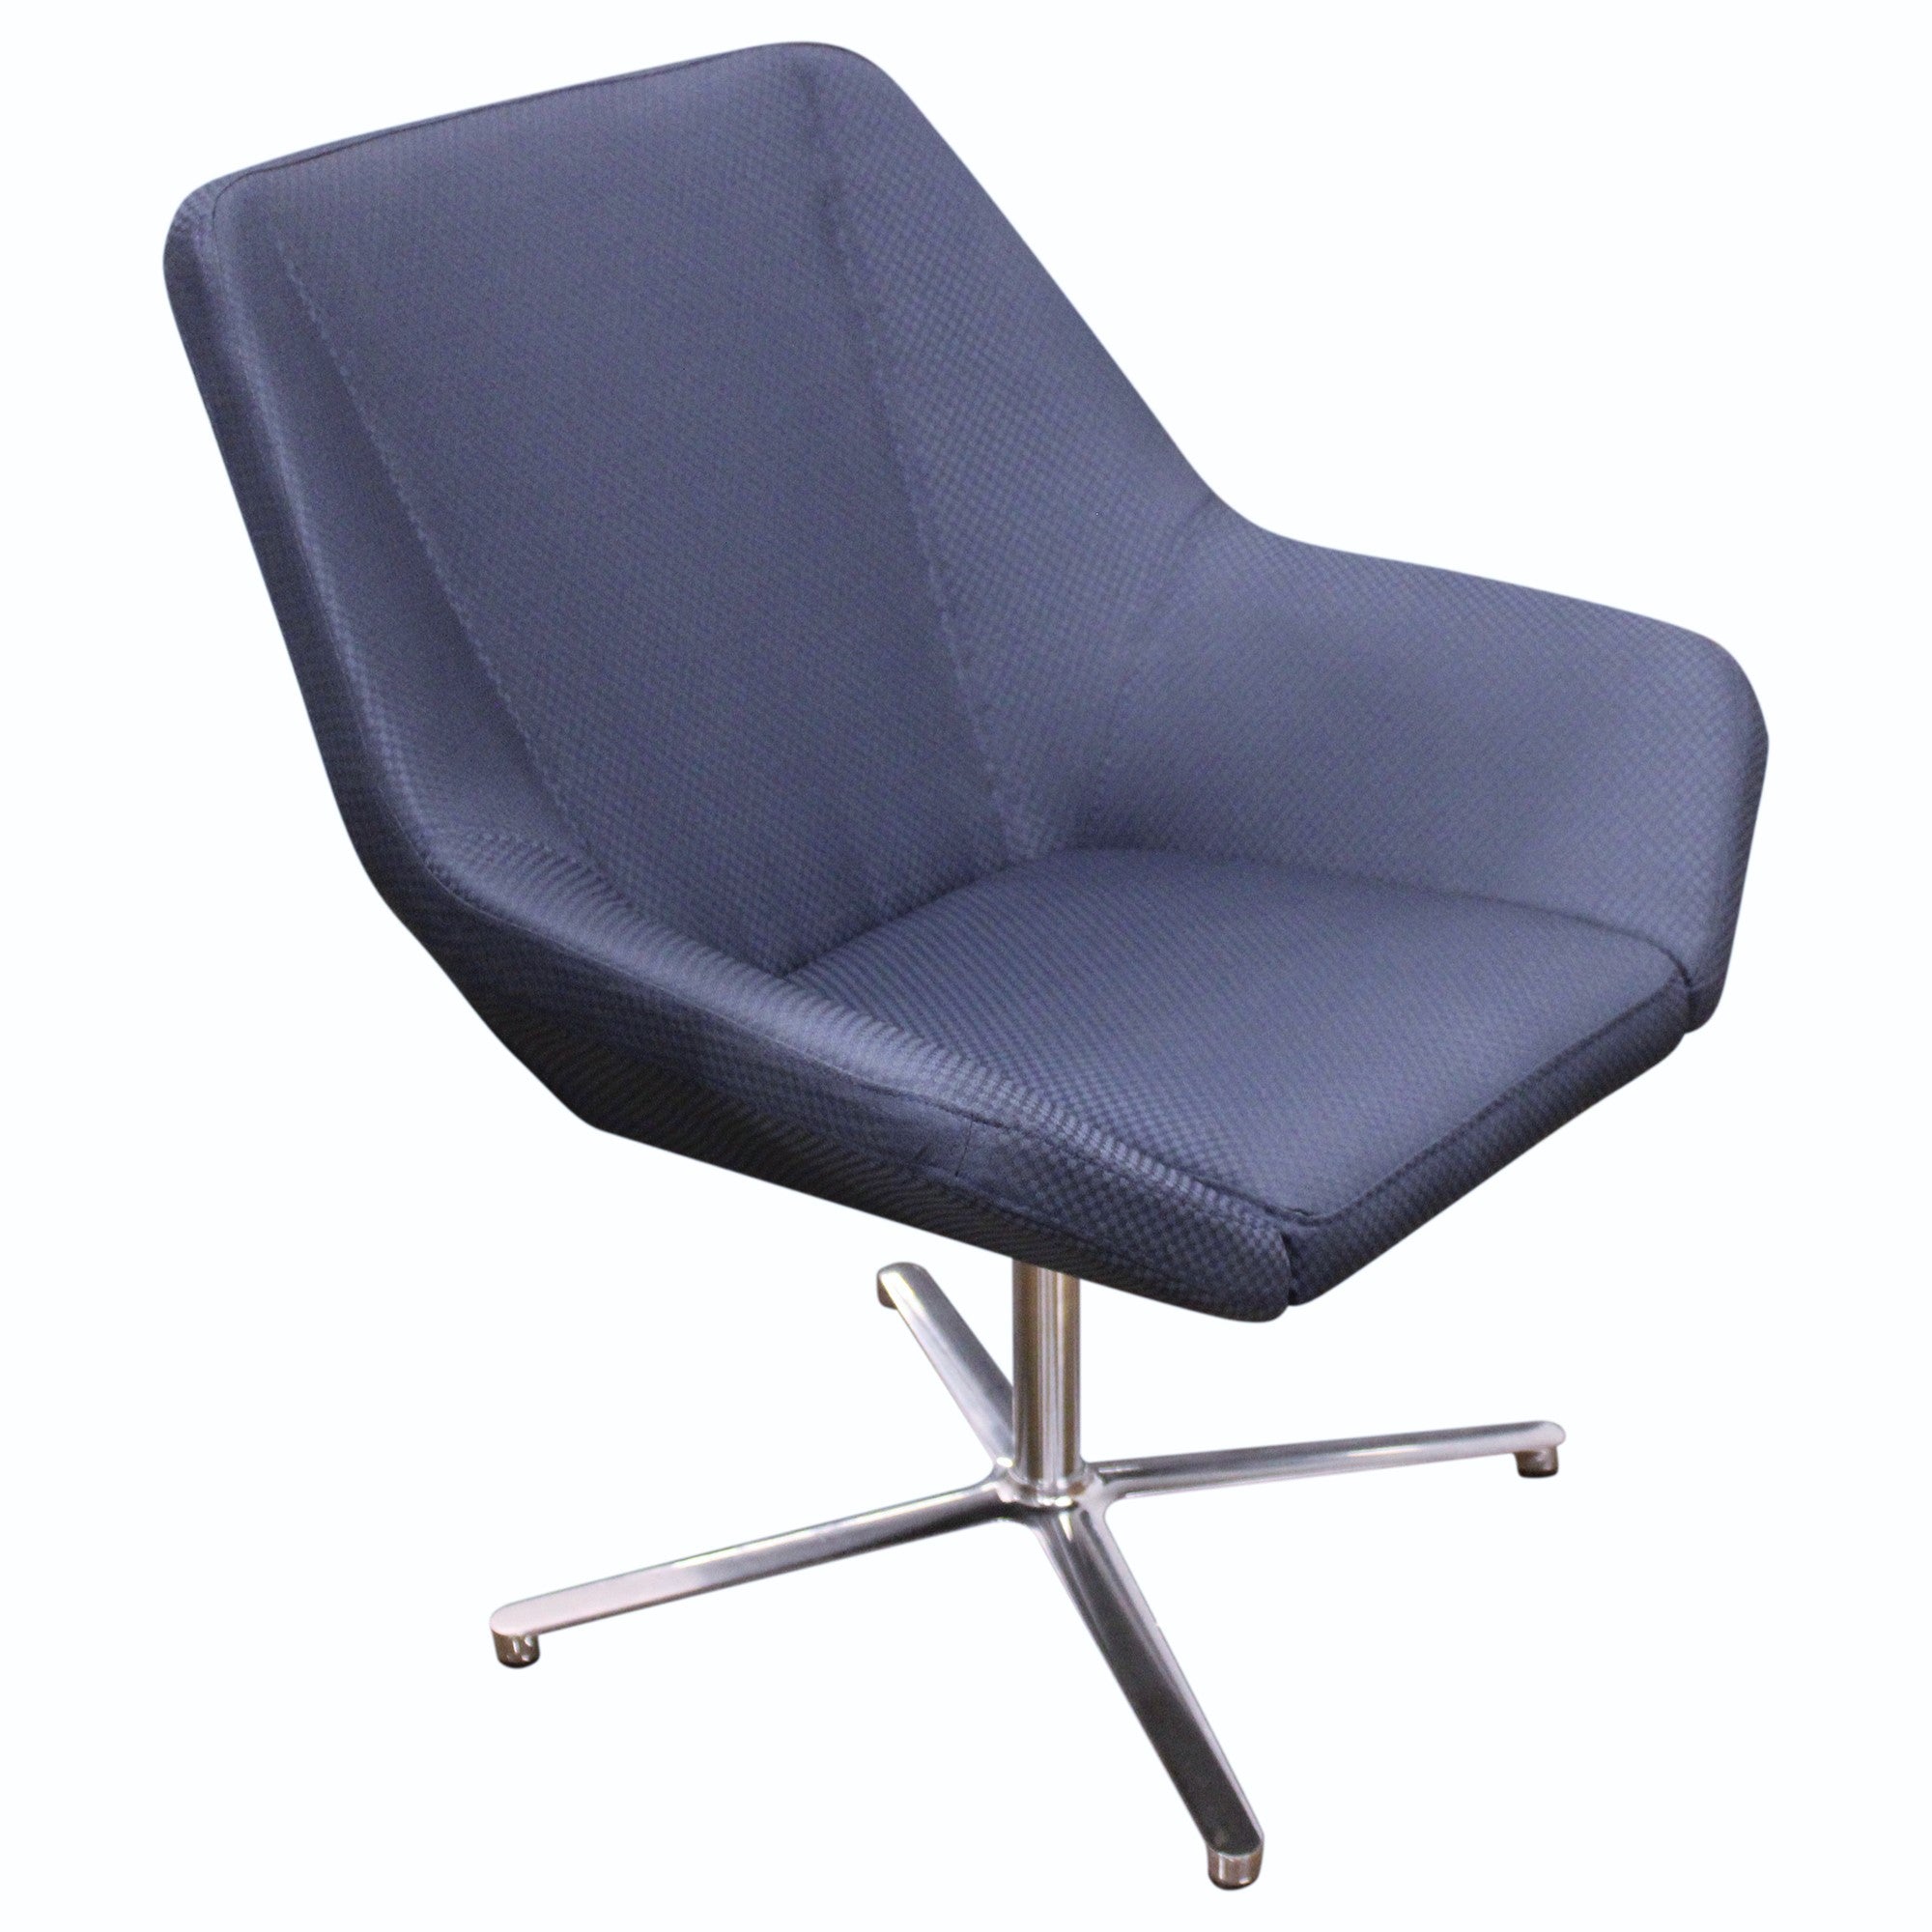 Keilhauer Cahoots Swivel Base Lounge Chair, Navy Blue - Preowned